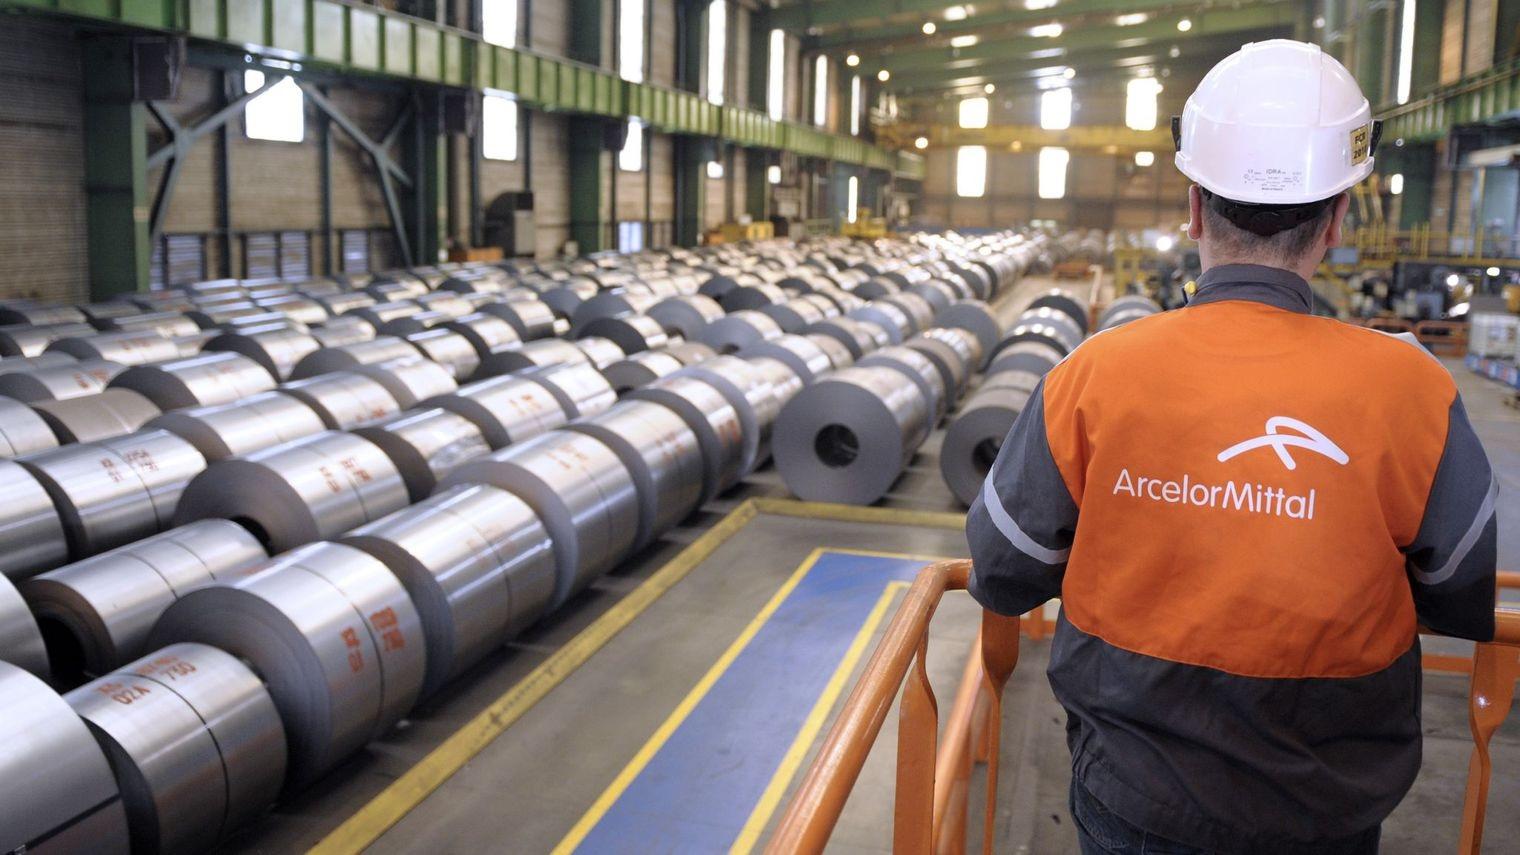 Lakshmi Mittal shaped the steel industry in the Region and across the world